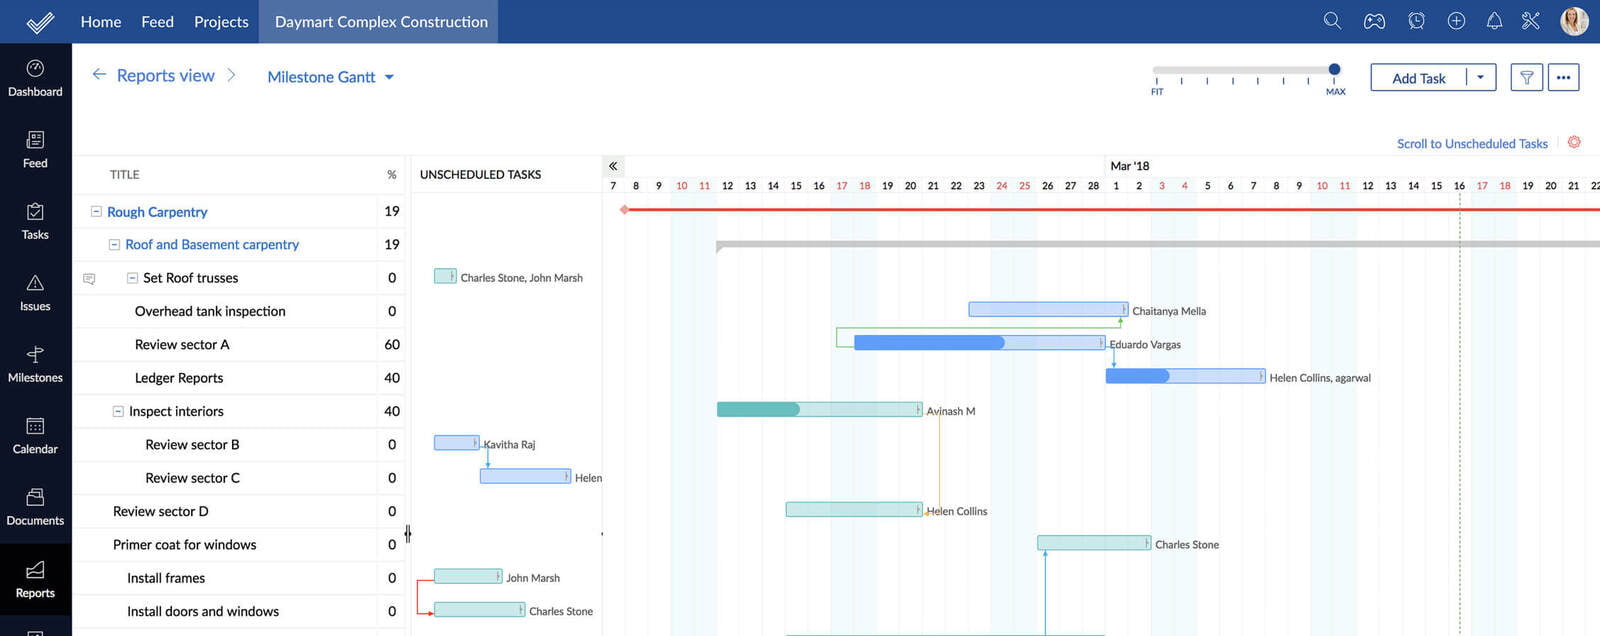 Zoho Projects easy to use interface make project management a breeze